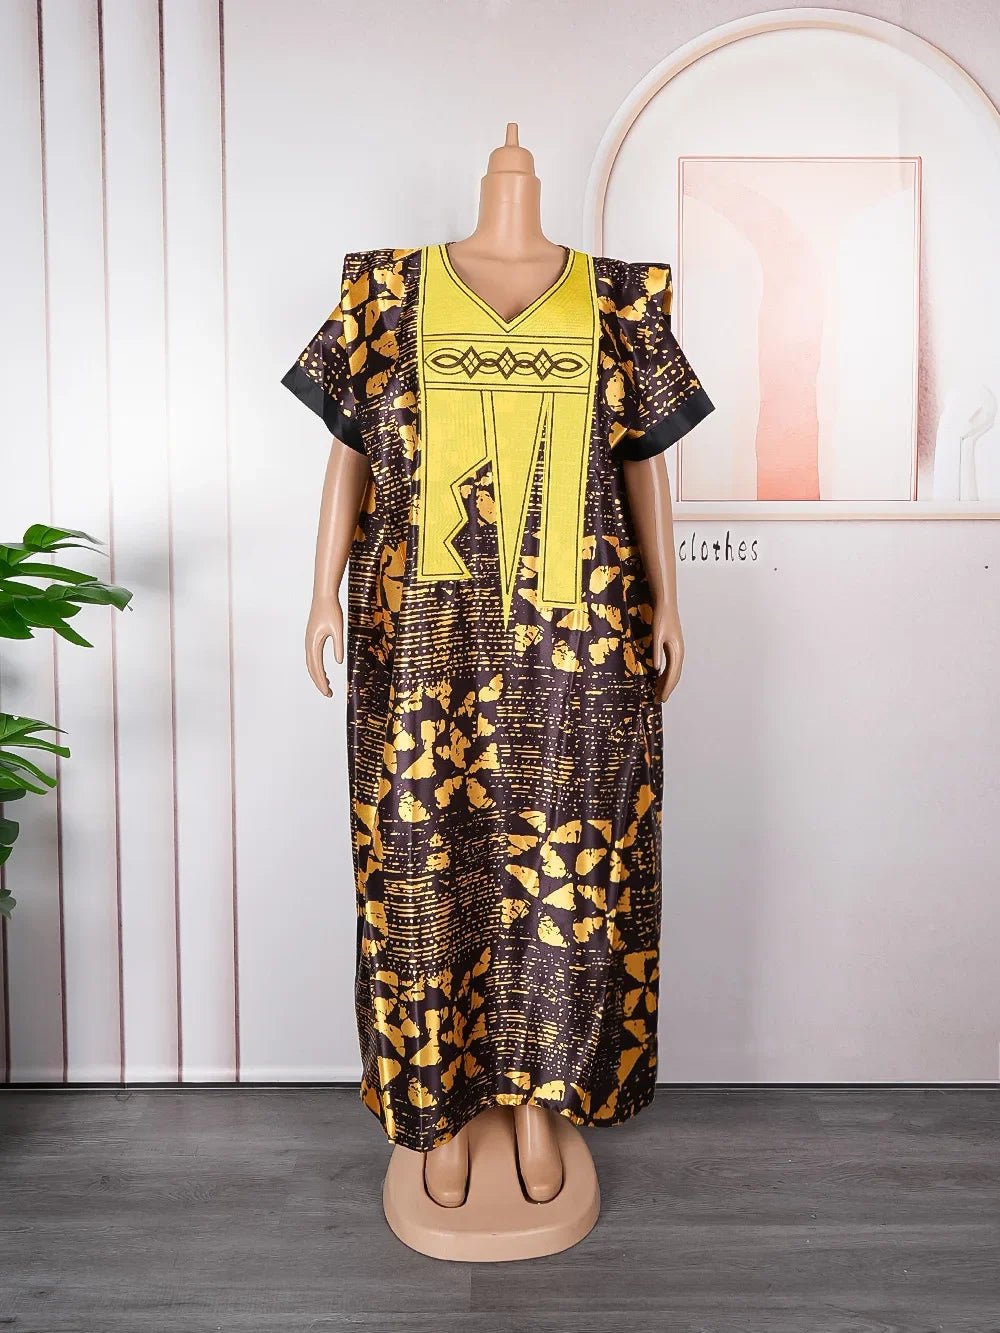 Elegant African Abayas: Fashionable Dresses for Women - Dashiki Inspired Evening Gowns - Flexi Africa - Flexi Africa offers Free Delivery Worldwide - Vibrant African traditional clothing showcasing bold prints and intricate designs